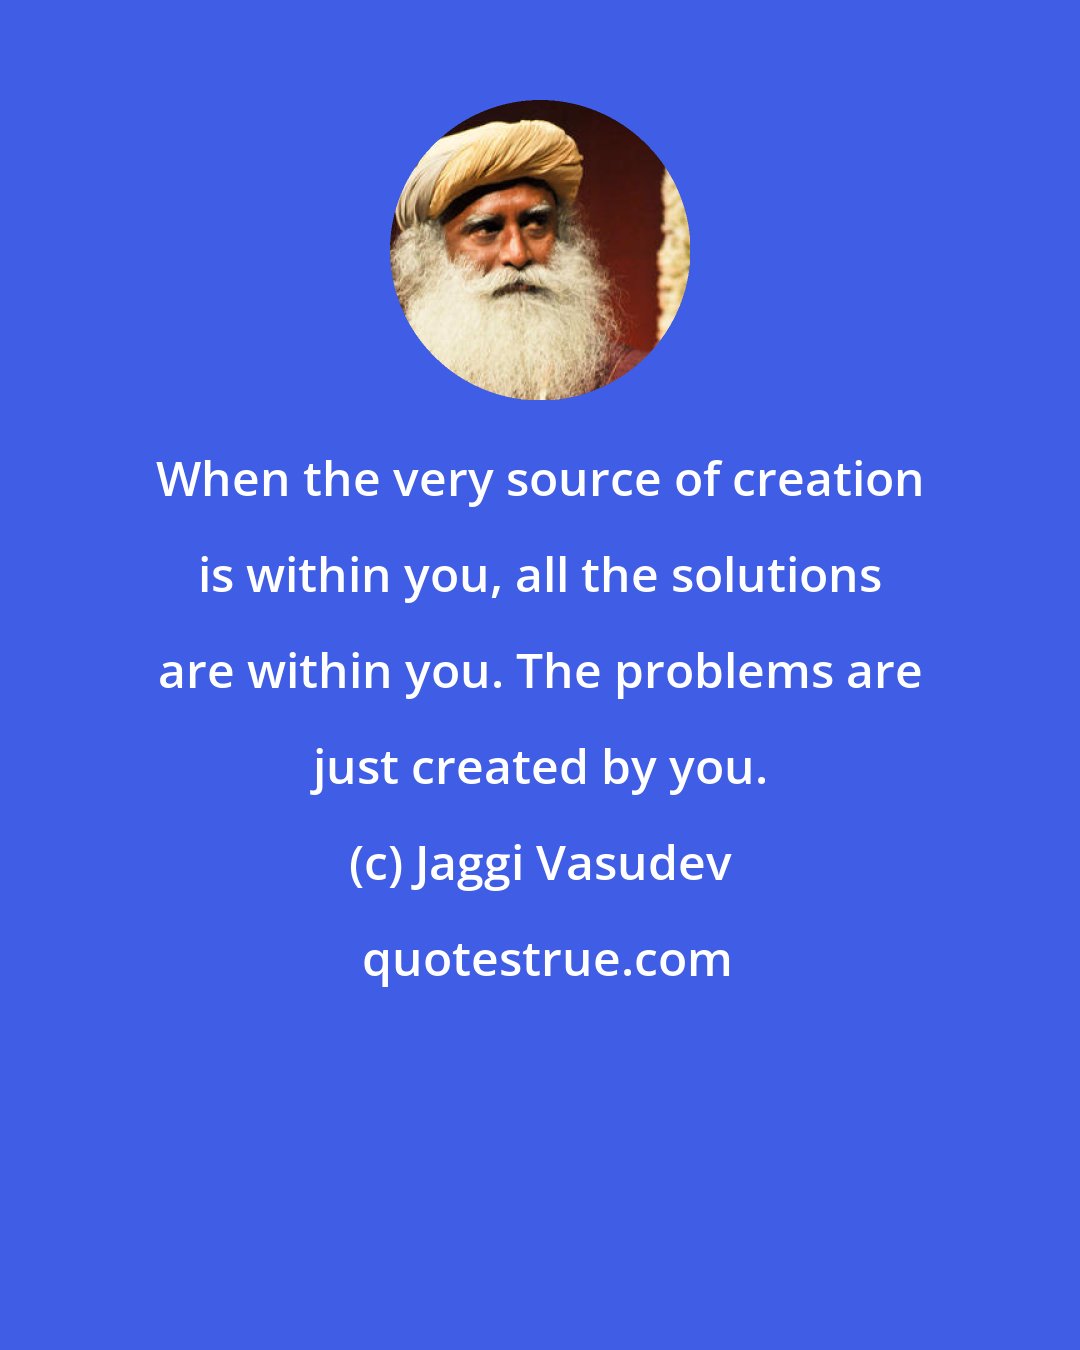 Jaggi Vasudev: When the very source of creation is within you, all the solutions are within you. The problems are just created by you.